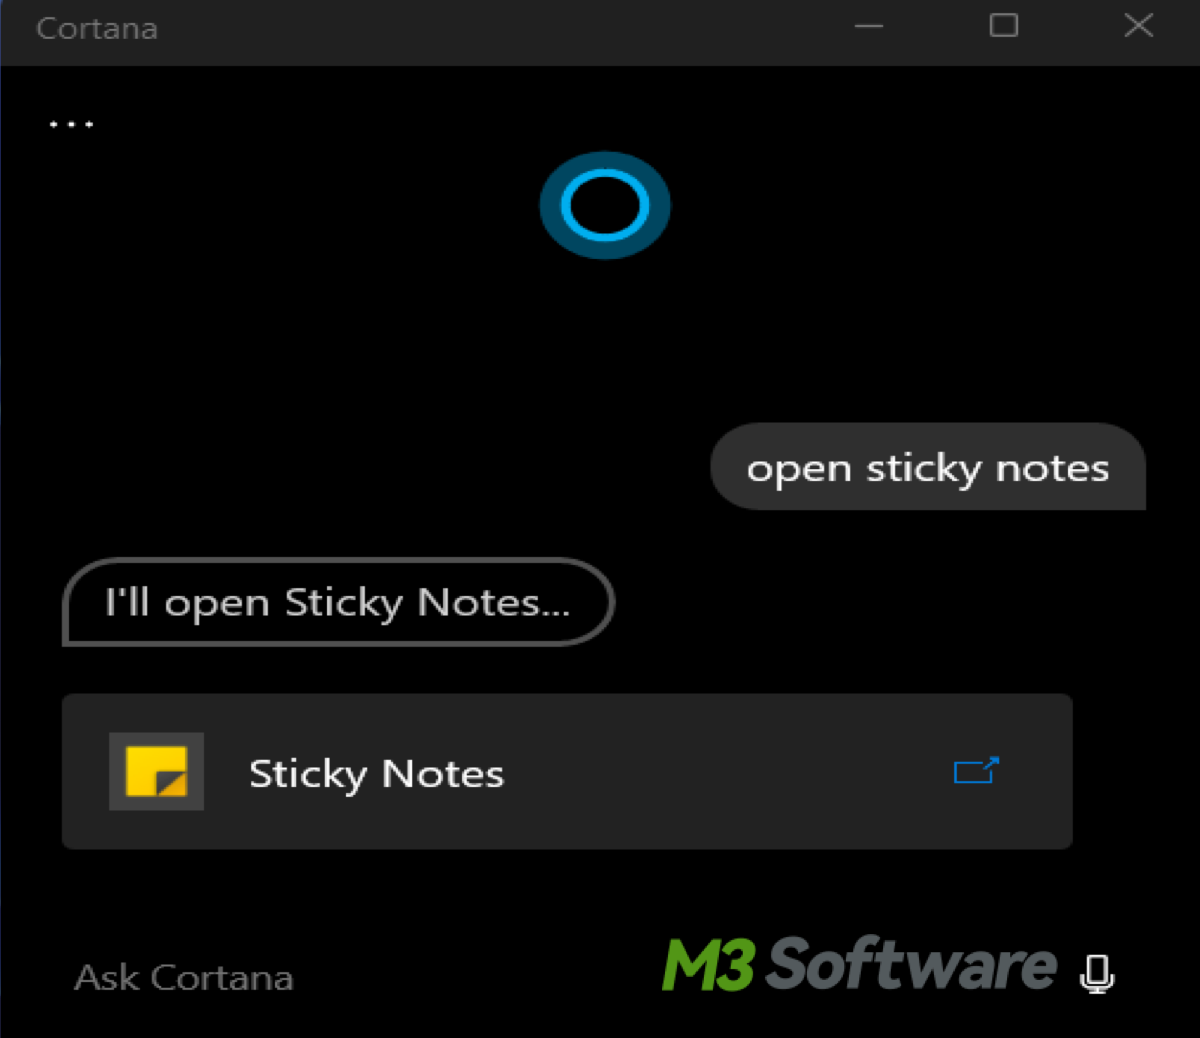 Ask Cortana to open Sticky Notes